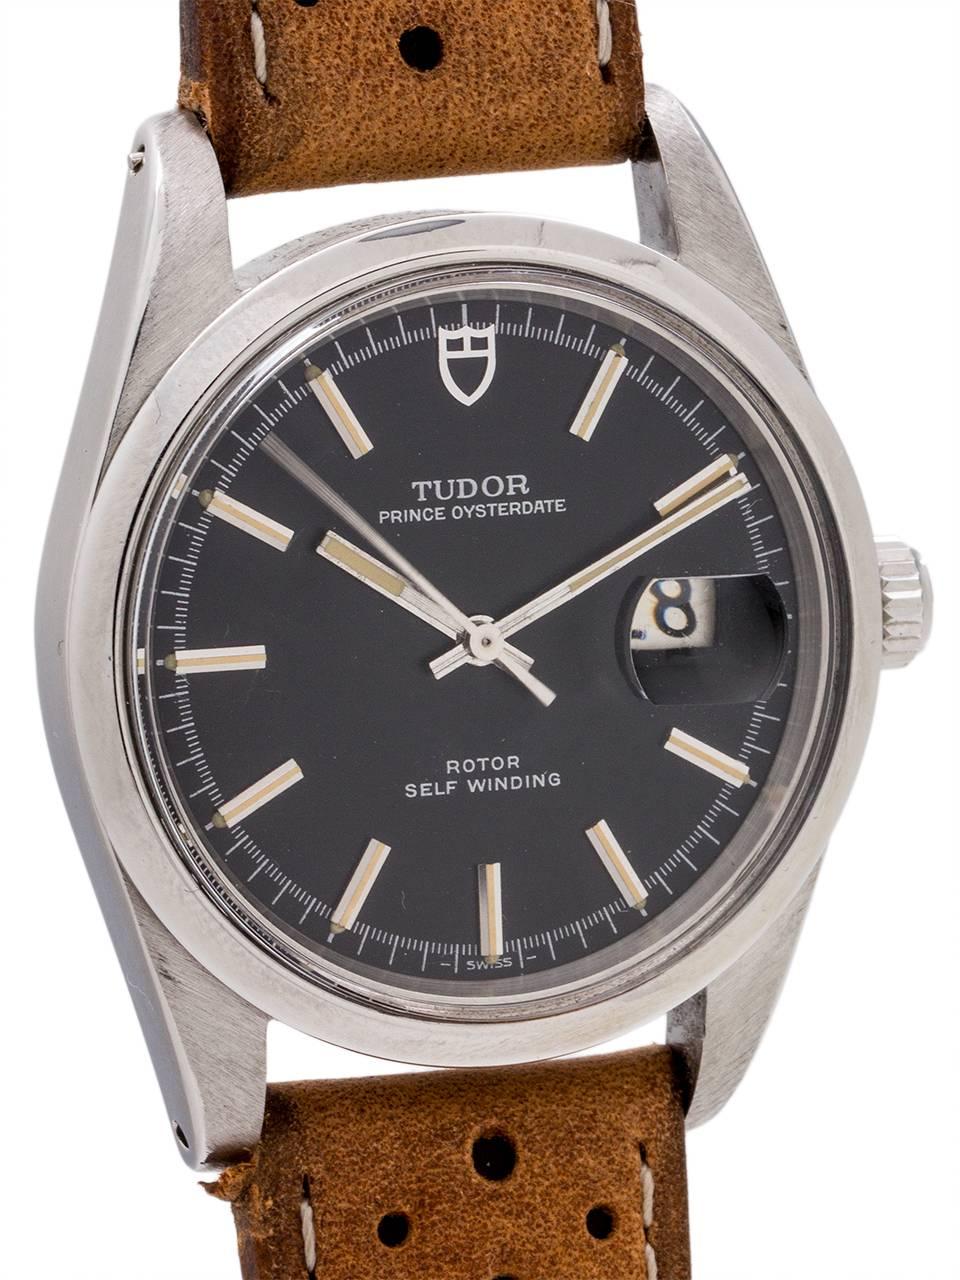 
Rare oversized Tudor Prince Oysterdate ref# 90800 circa 1978. The stainless steel case measures a large 38mm, making it perfect for a modern everyday watch. Acrylic crystal, and beautiful condition original black dial with applied silver indexes